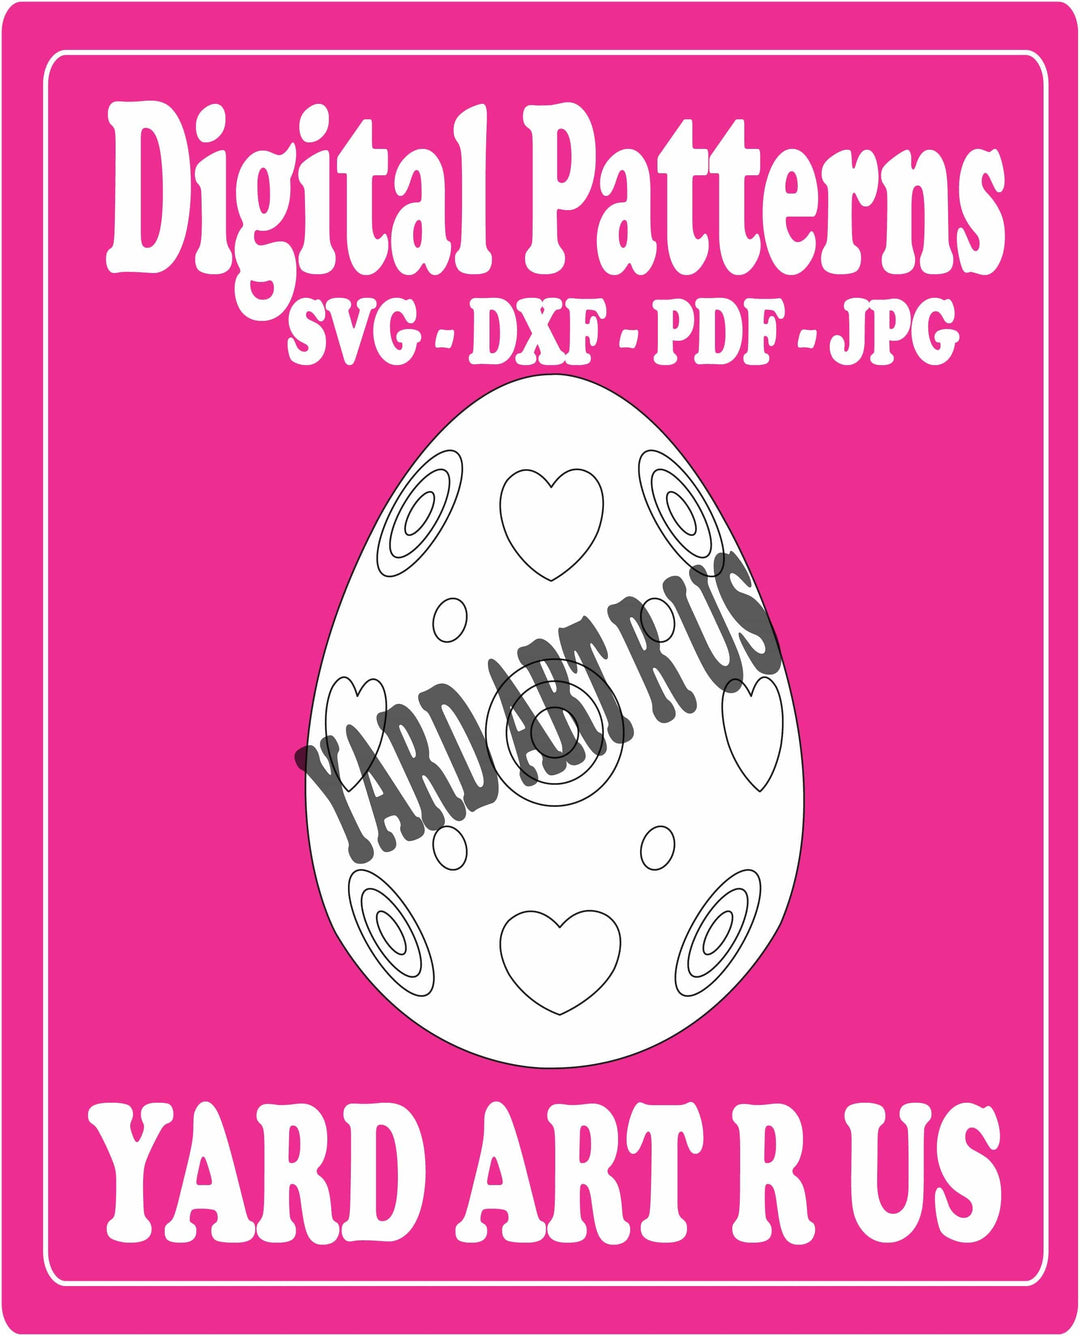 easter egg with hearts and targets digital pattern - SVG, DXF, PDF, and JPG file options